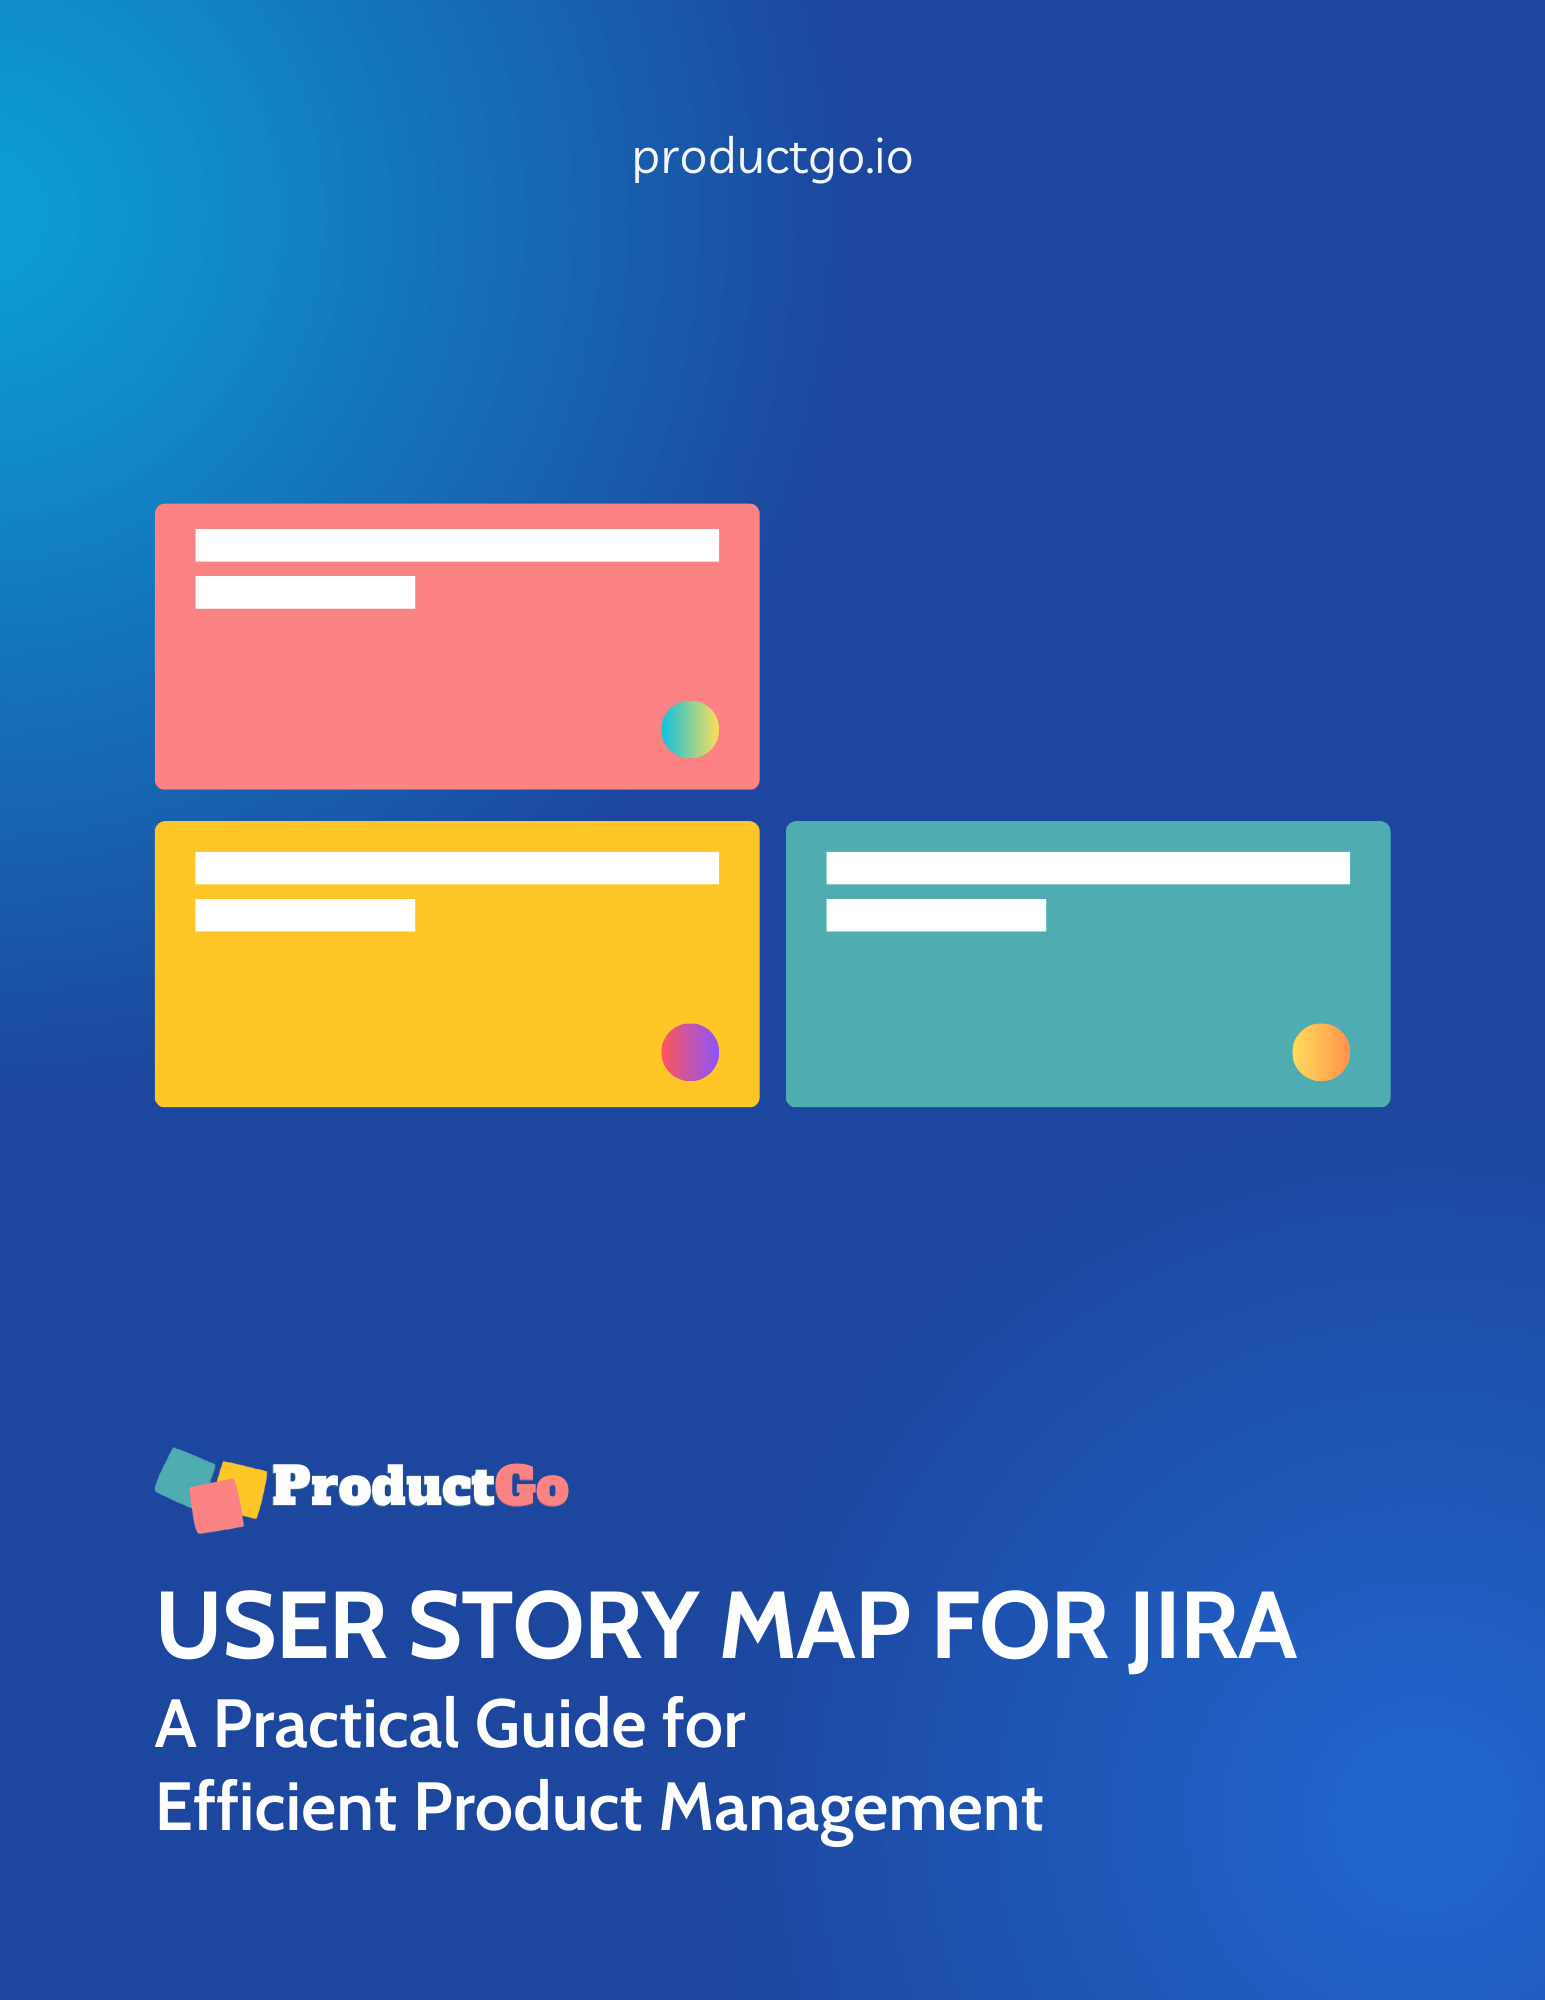 User-Story-Map-for-Jira-A-practical-guide-for-Efficient-Project-Planning (1)